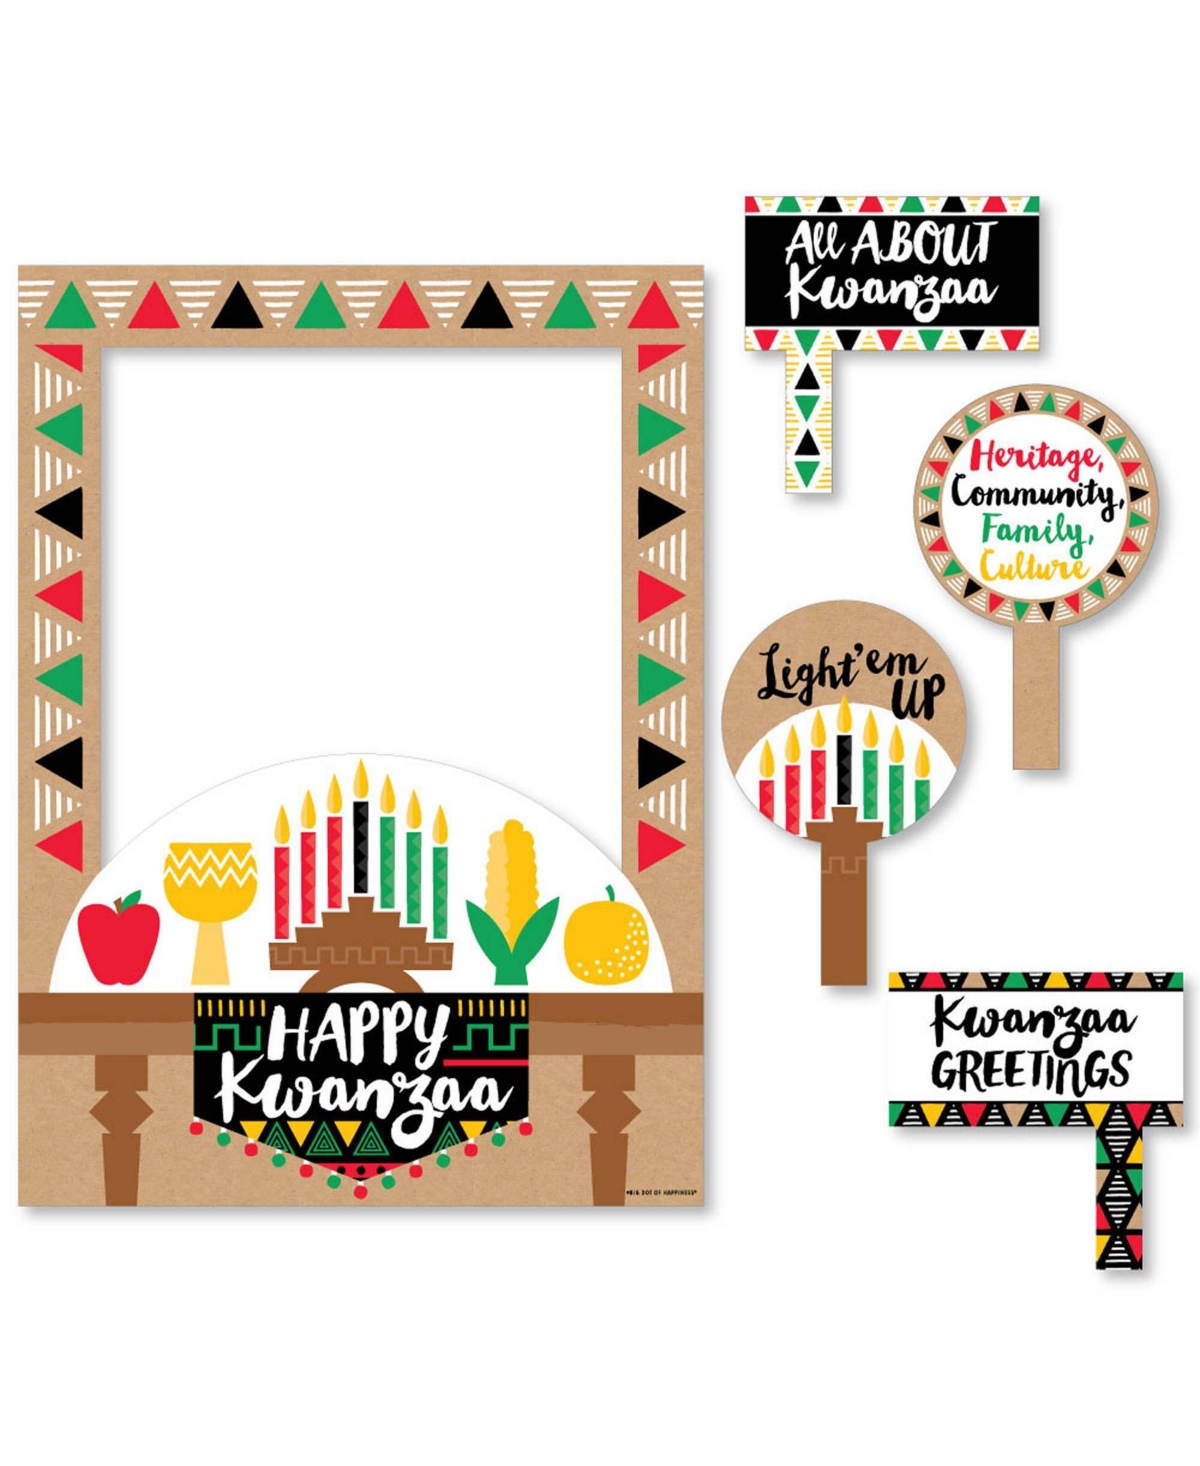 Happy Kwanzaa - Party Selfie Photo Booth Picture Frame & Props